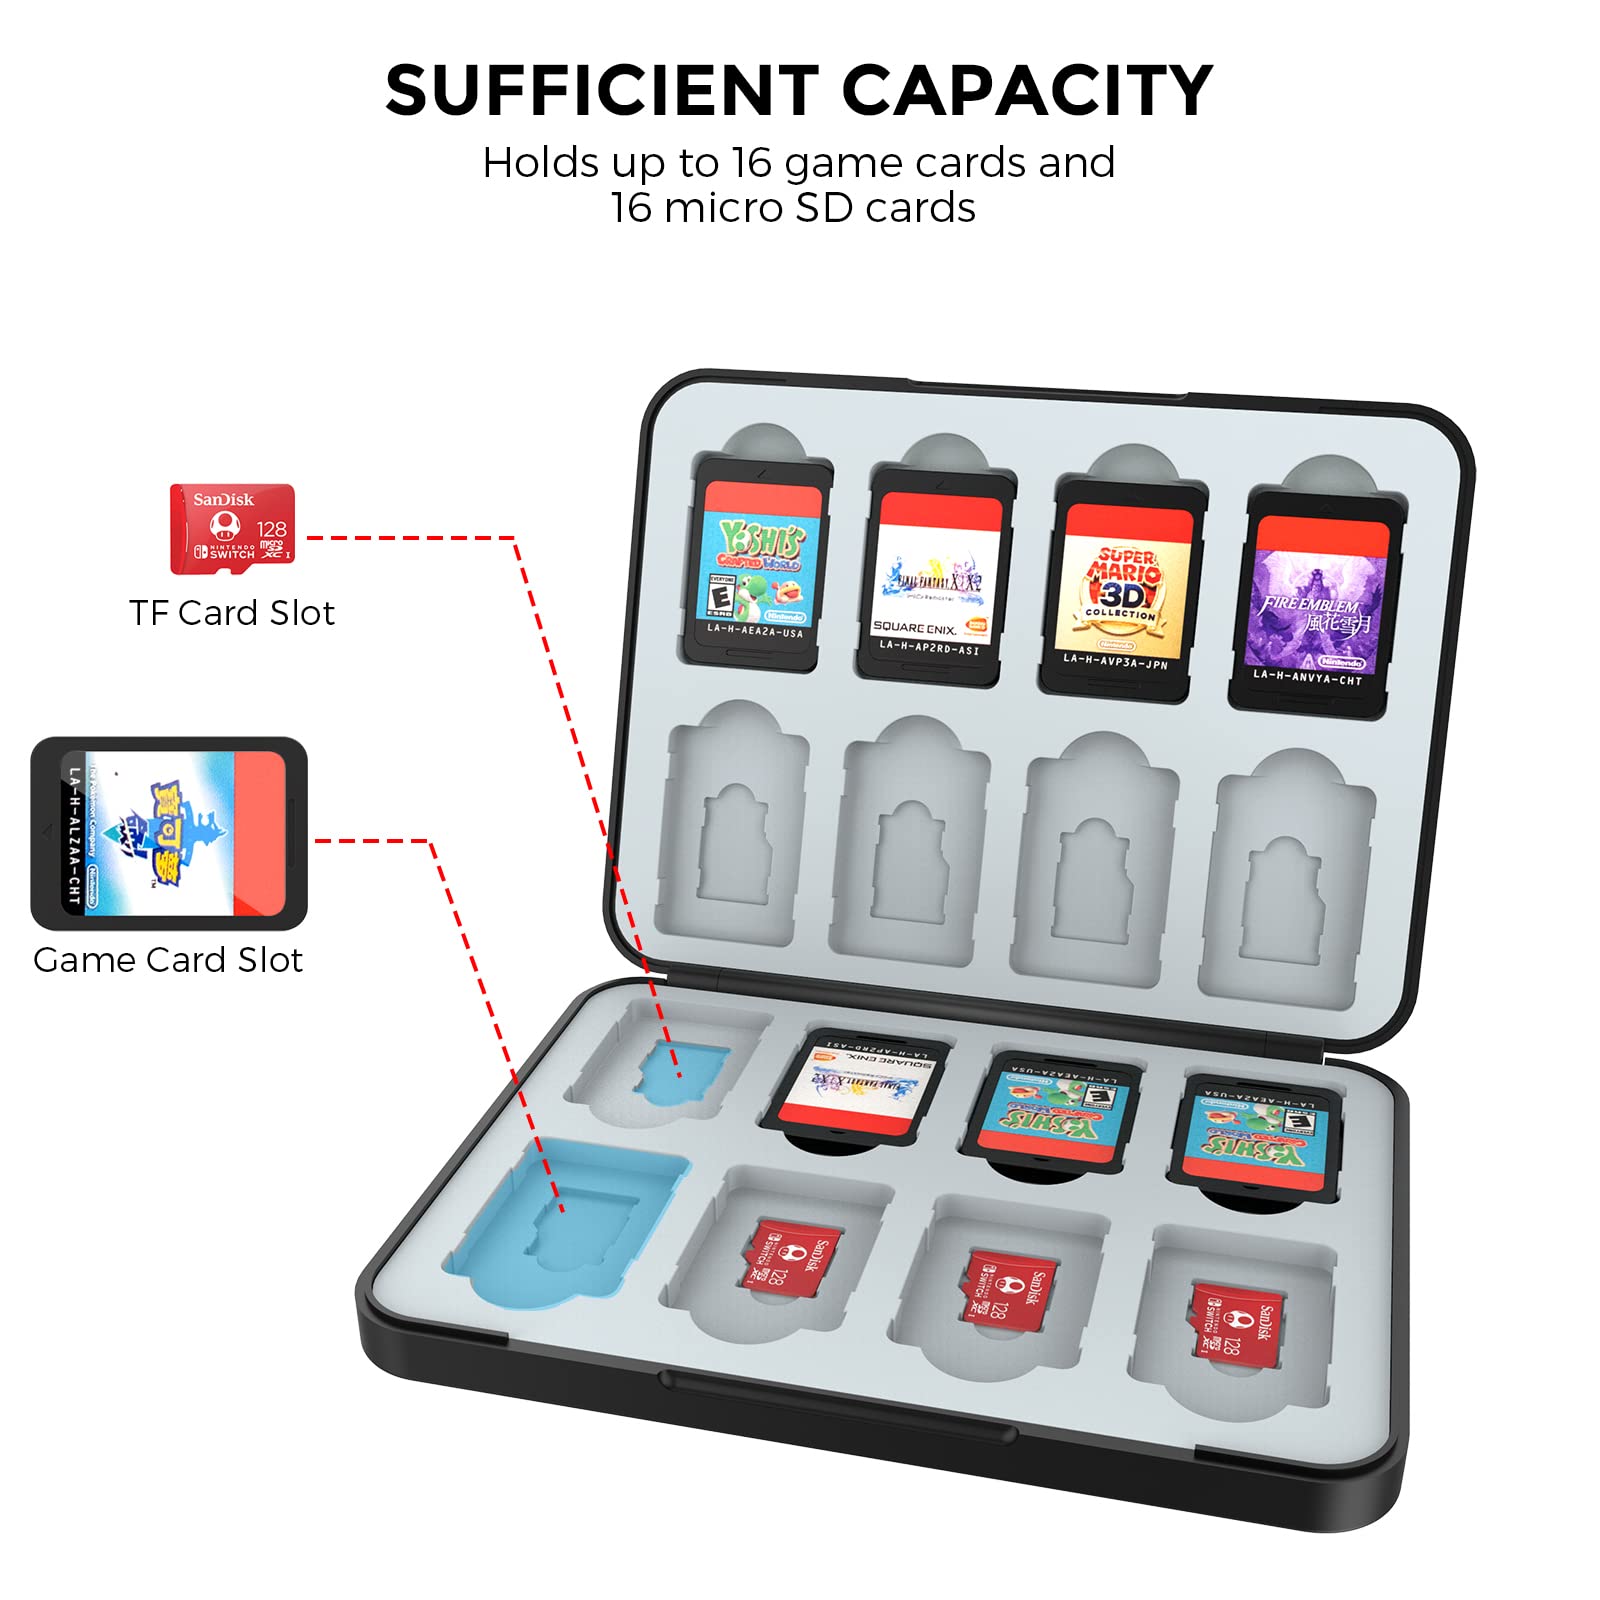 HEIYING Game Card Case for Nintendo Switch&Switch OLED,Customized Pattern Design Switch Lite Game Card Storage Case with 16 Game Card Slots and 16 Micro SD Card Slots.